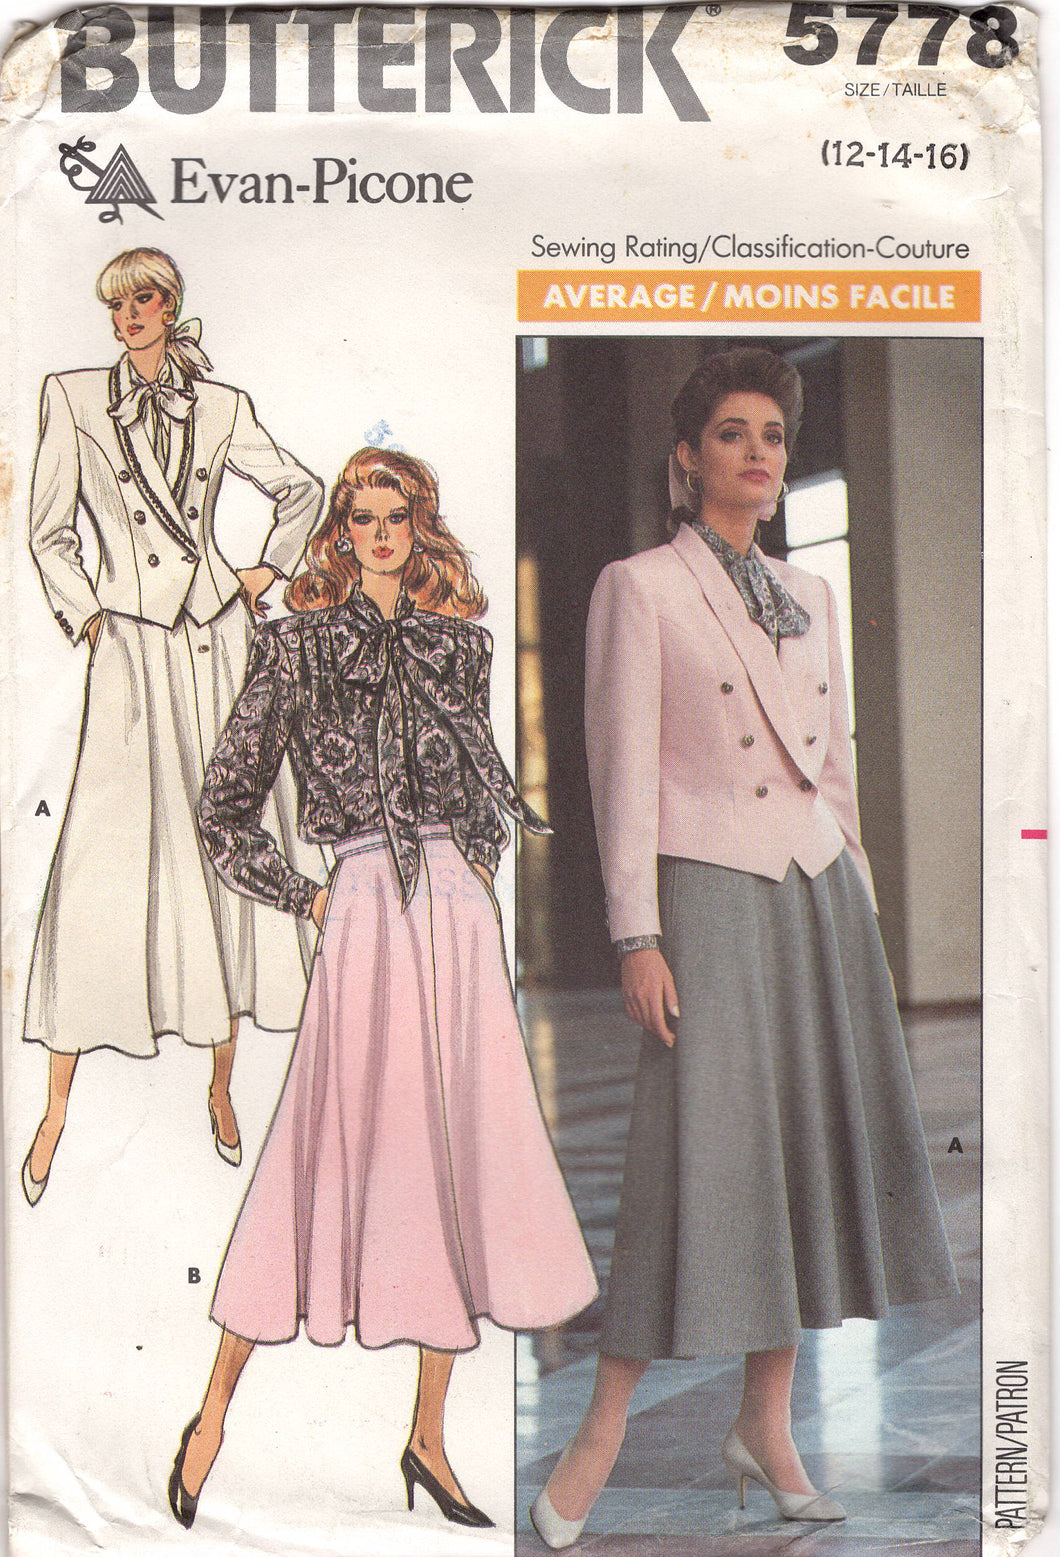 1980's Butterick Double Breasted Jacket, Button Up Top with Pussy Bow, and Flared Skirt pattern - Bust 34-38